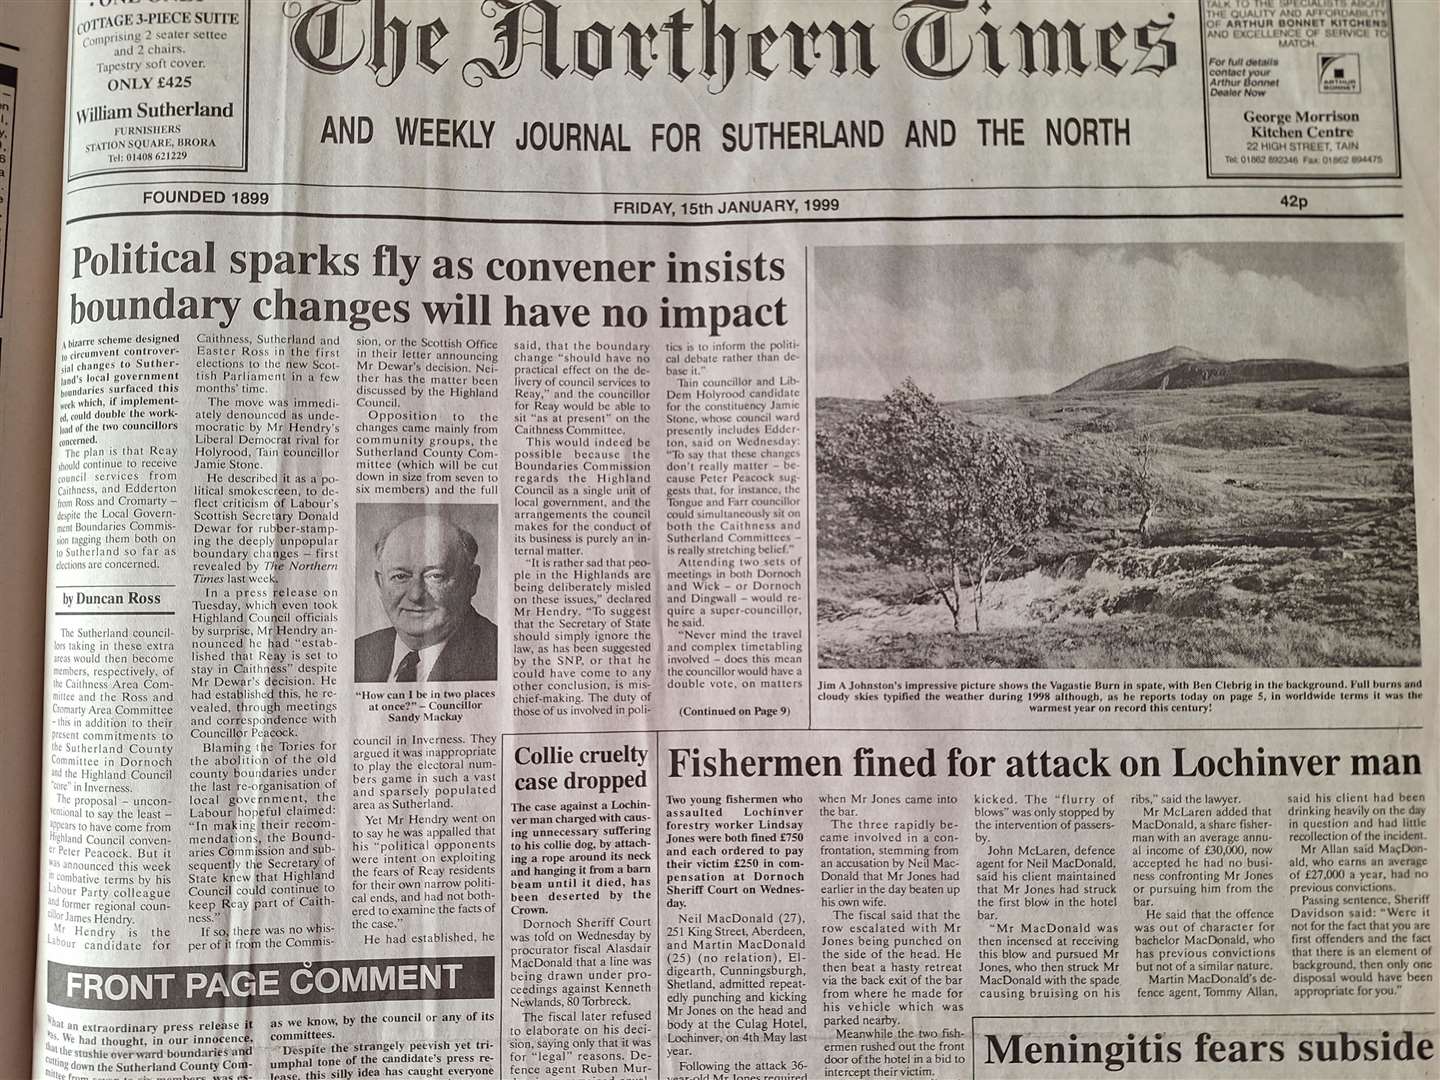 The edition of January 15, 1999.